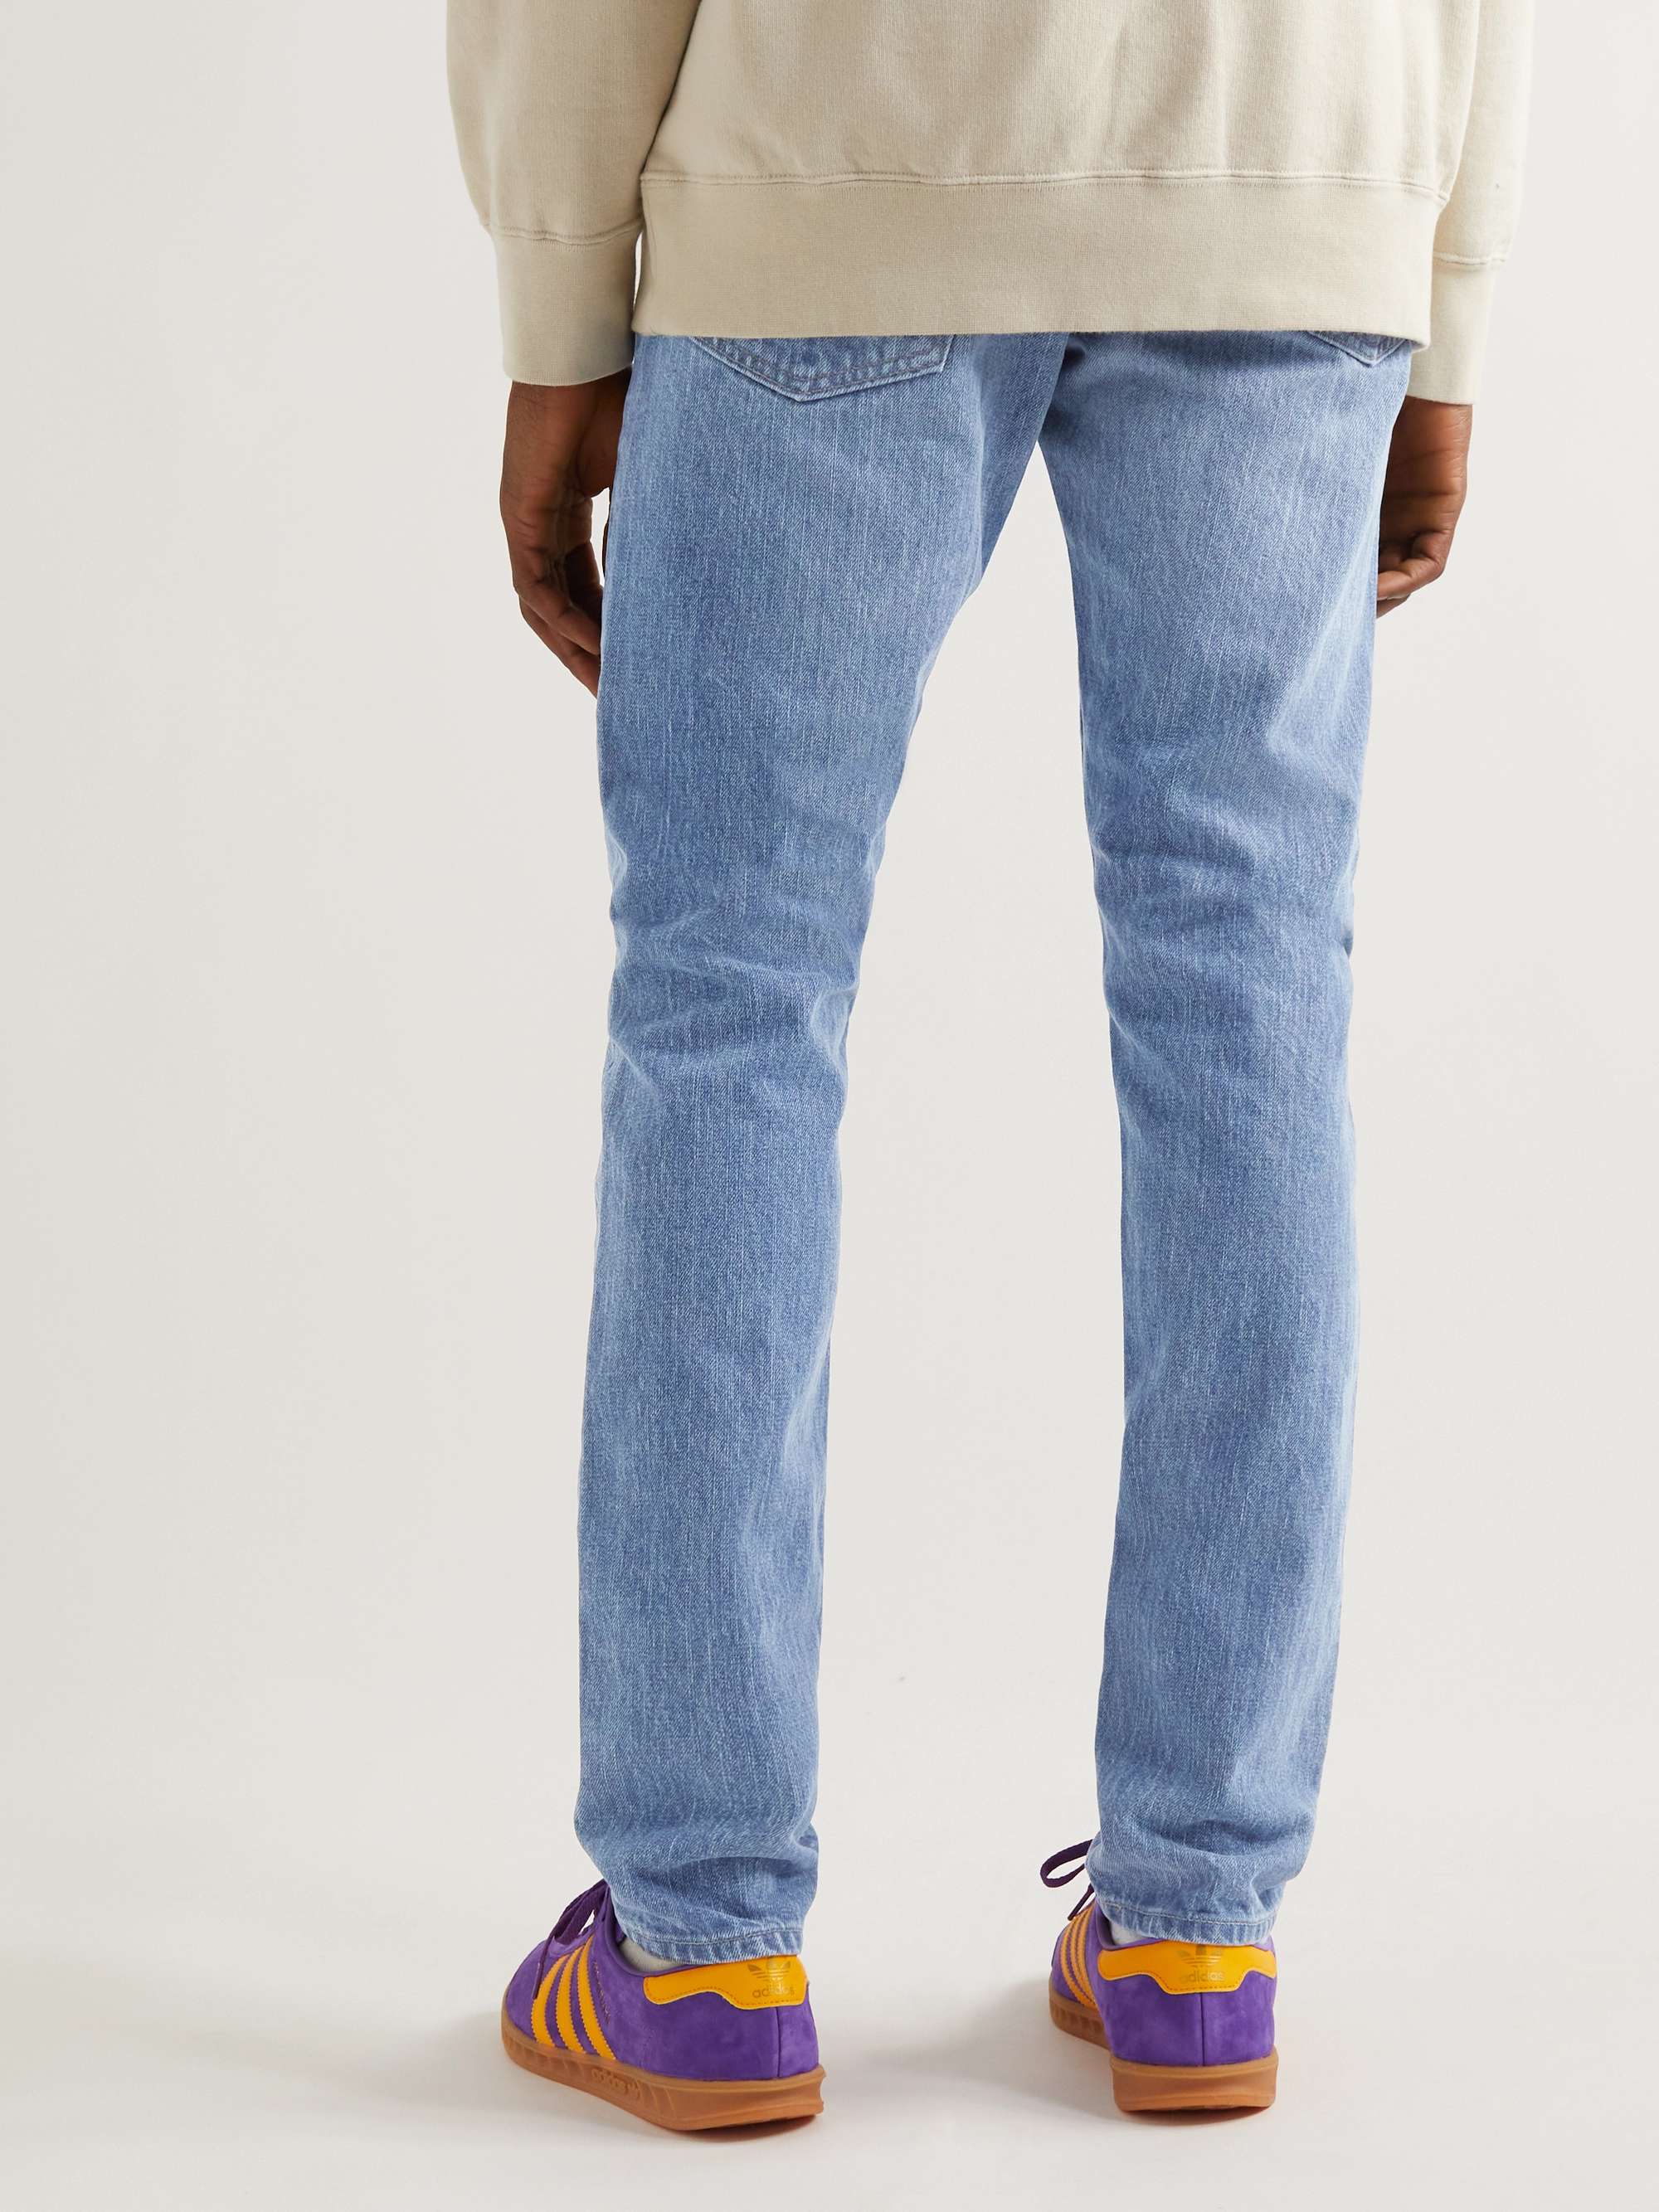 EDWIN Slim-Fit Recycled Selvedge Jeans